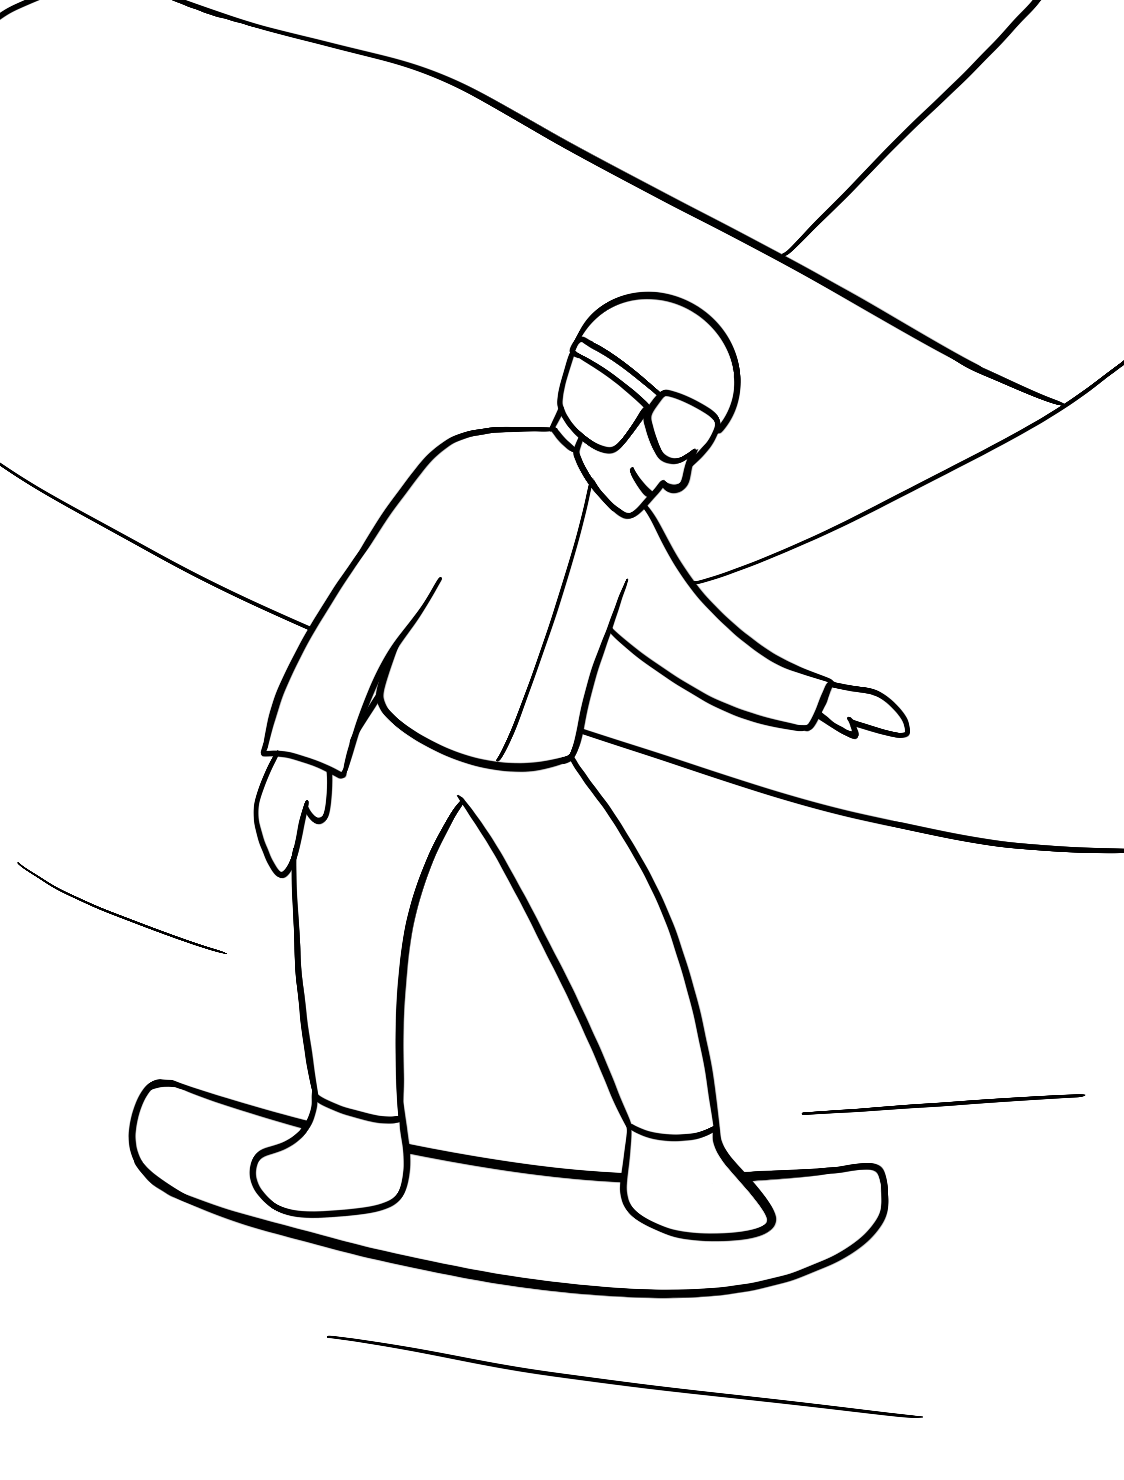 snowboarding printable coloring pages